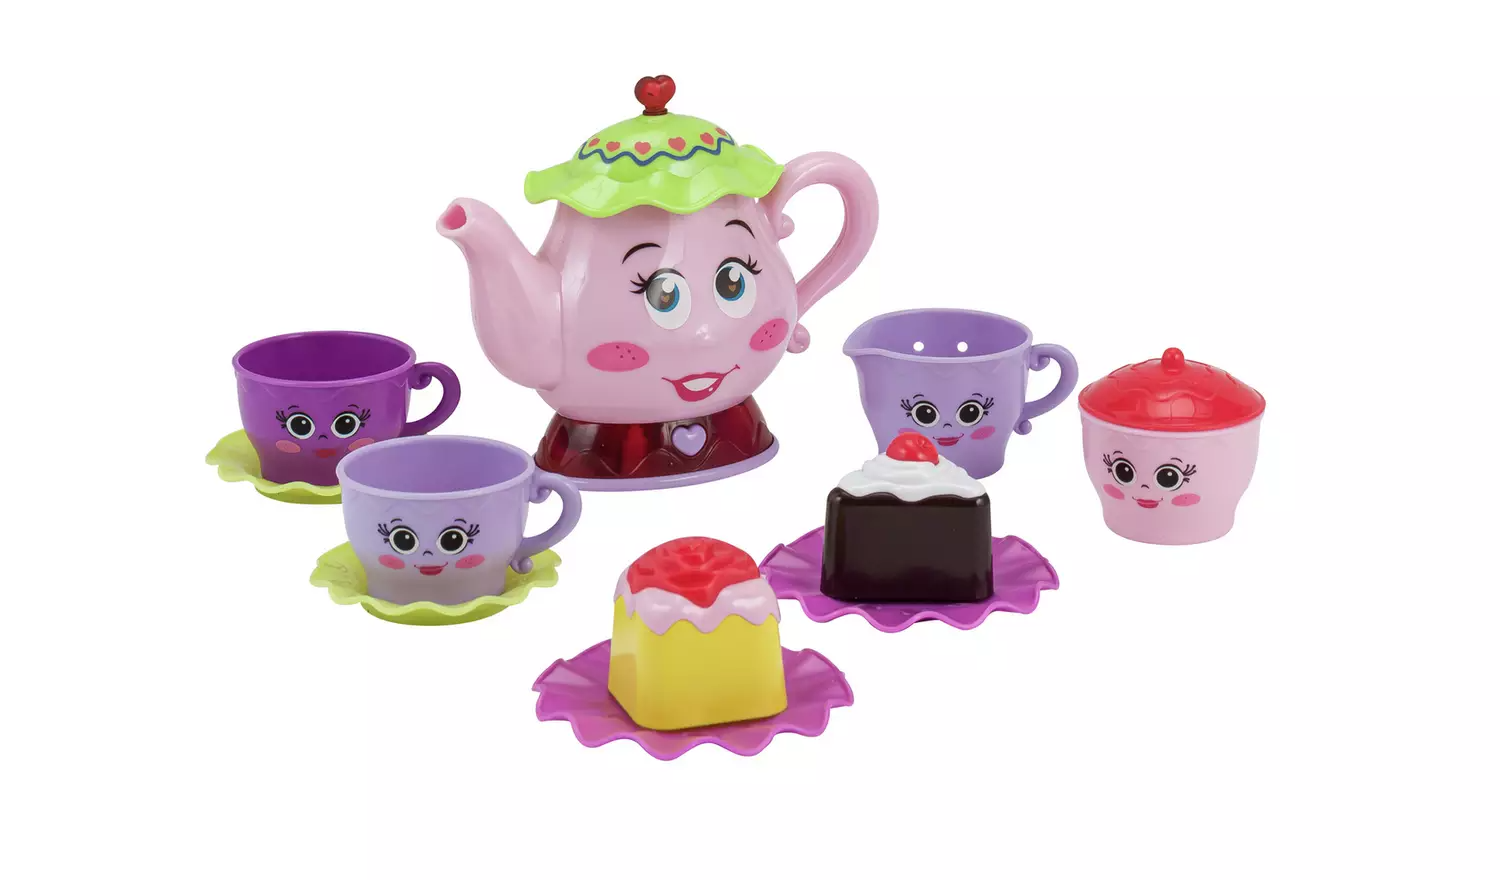 Chad Valley Pink Tea Party Set